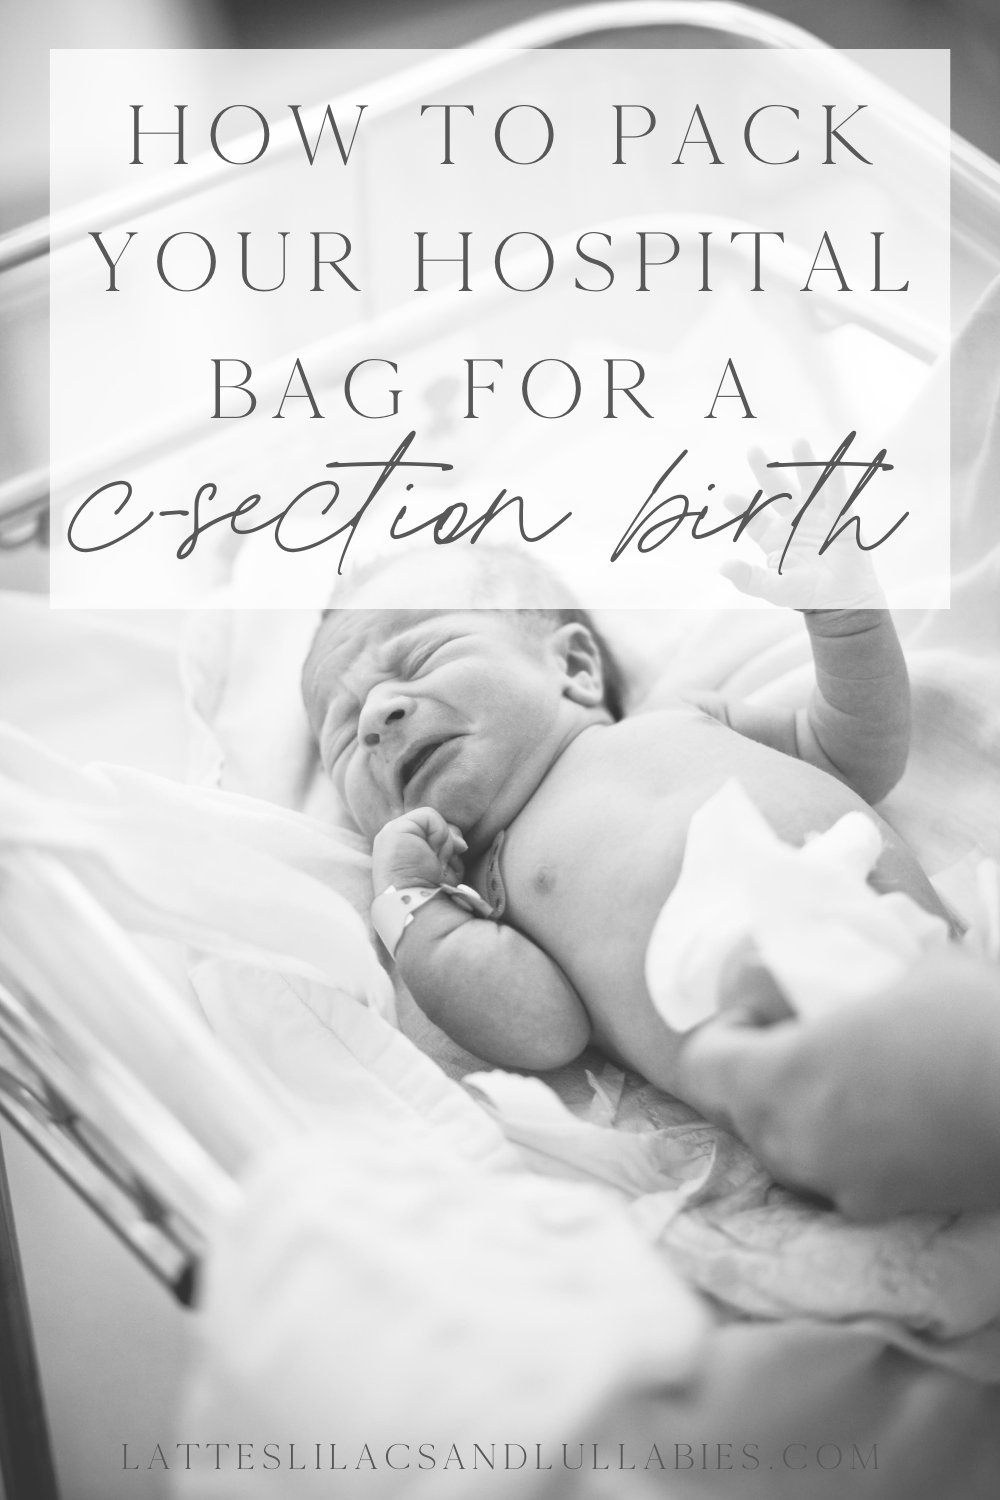 How To Pack Your Hospital Bag For C-Section